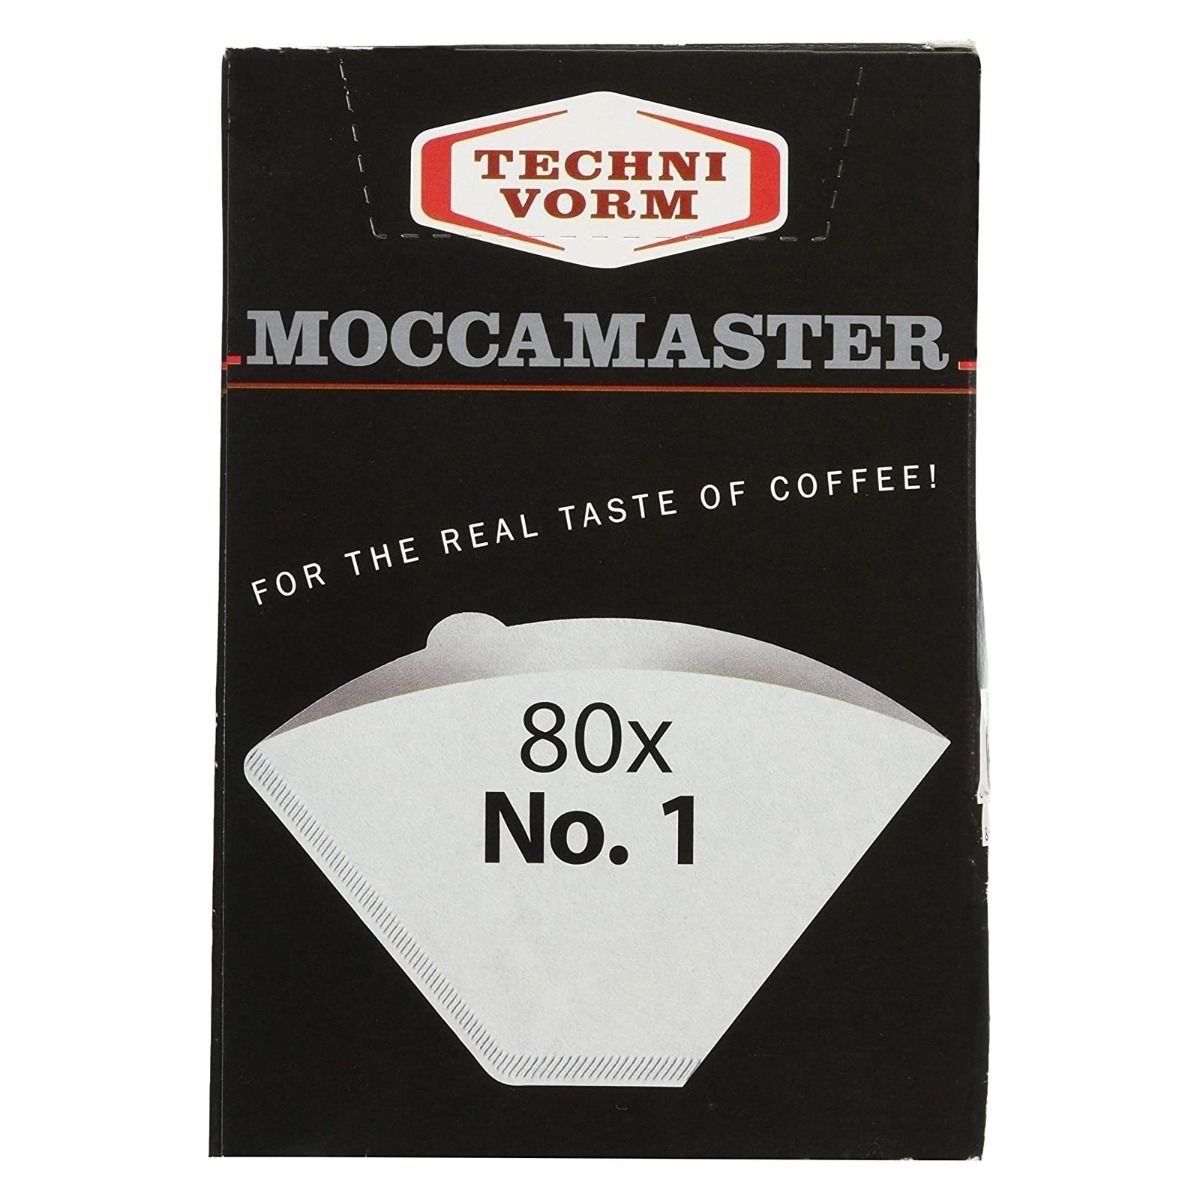 1 Cup-One (White Paper) Moccamaster | Everything